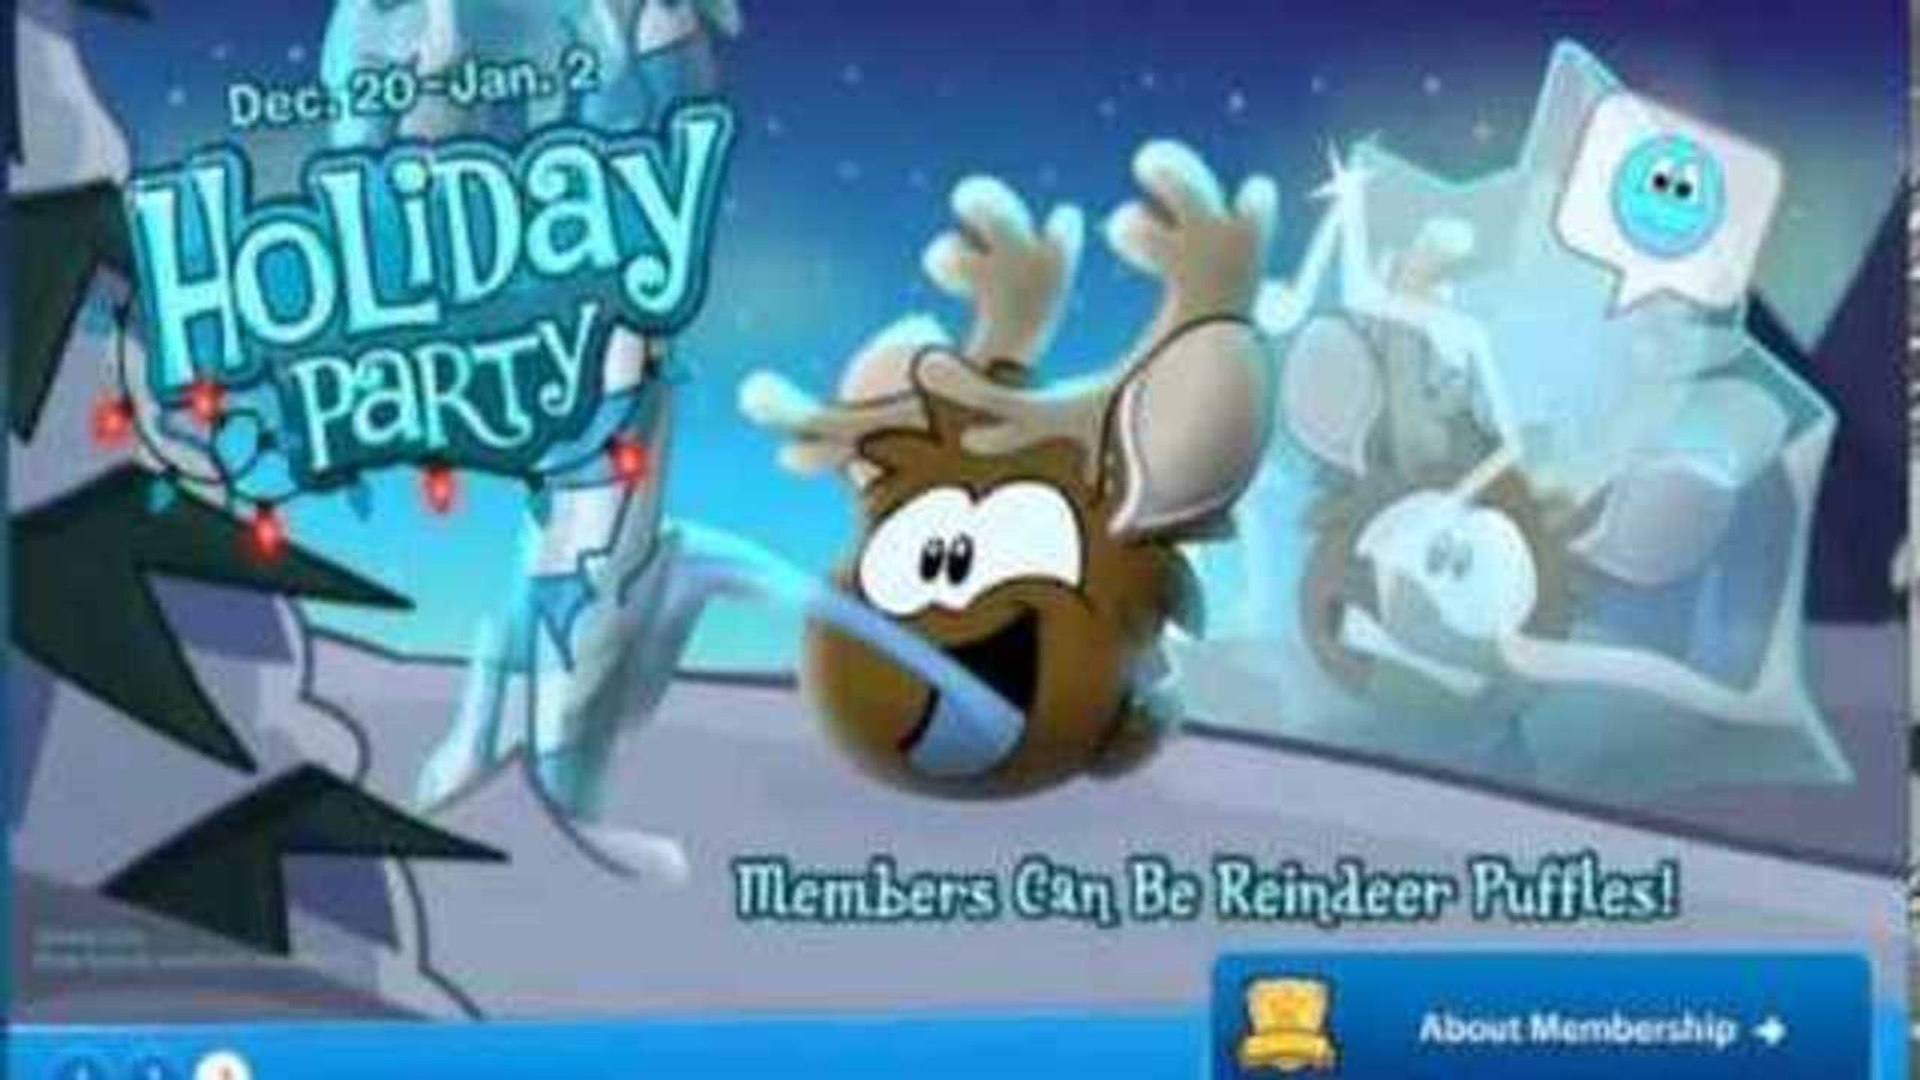 Club Penguin- Holiday Party 2012 (Reindeer Puffle)